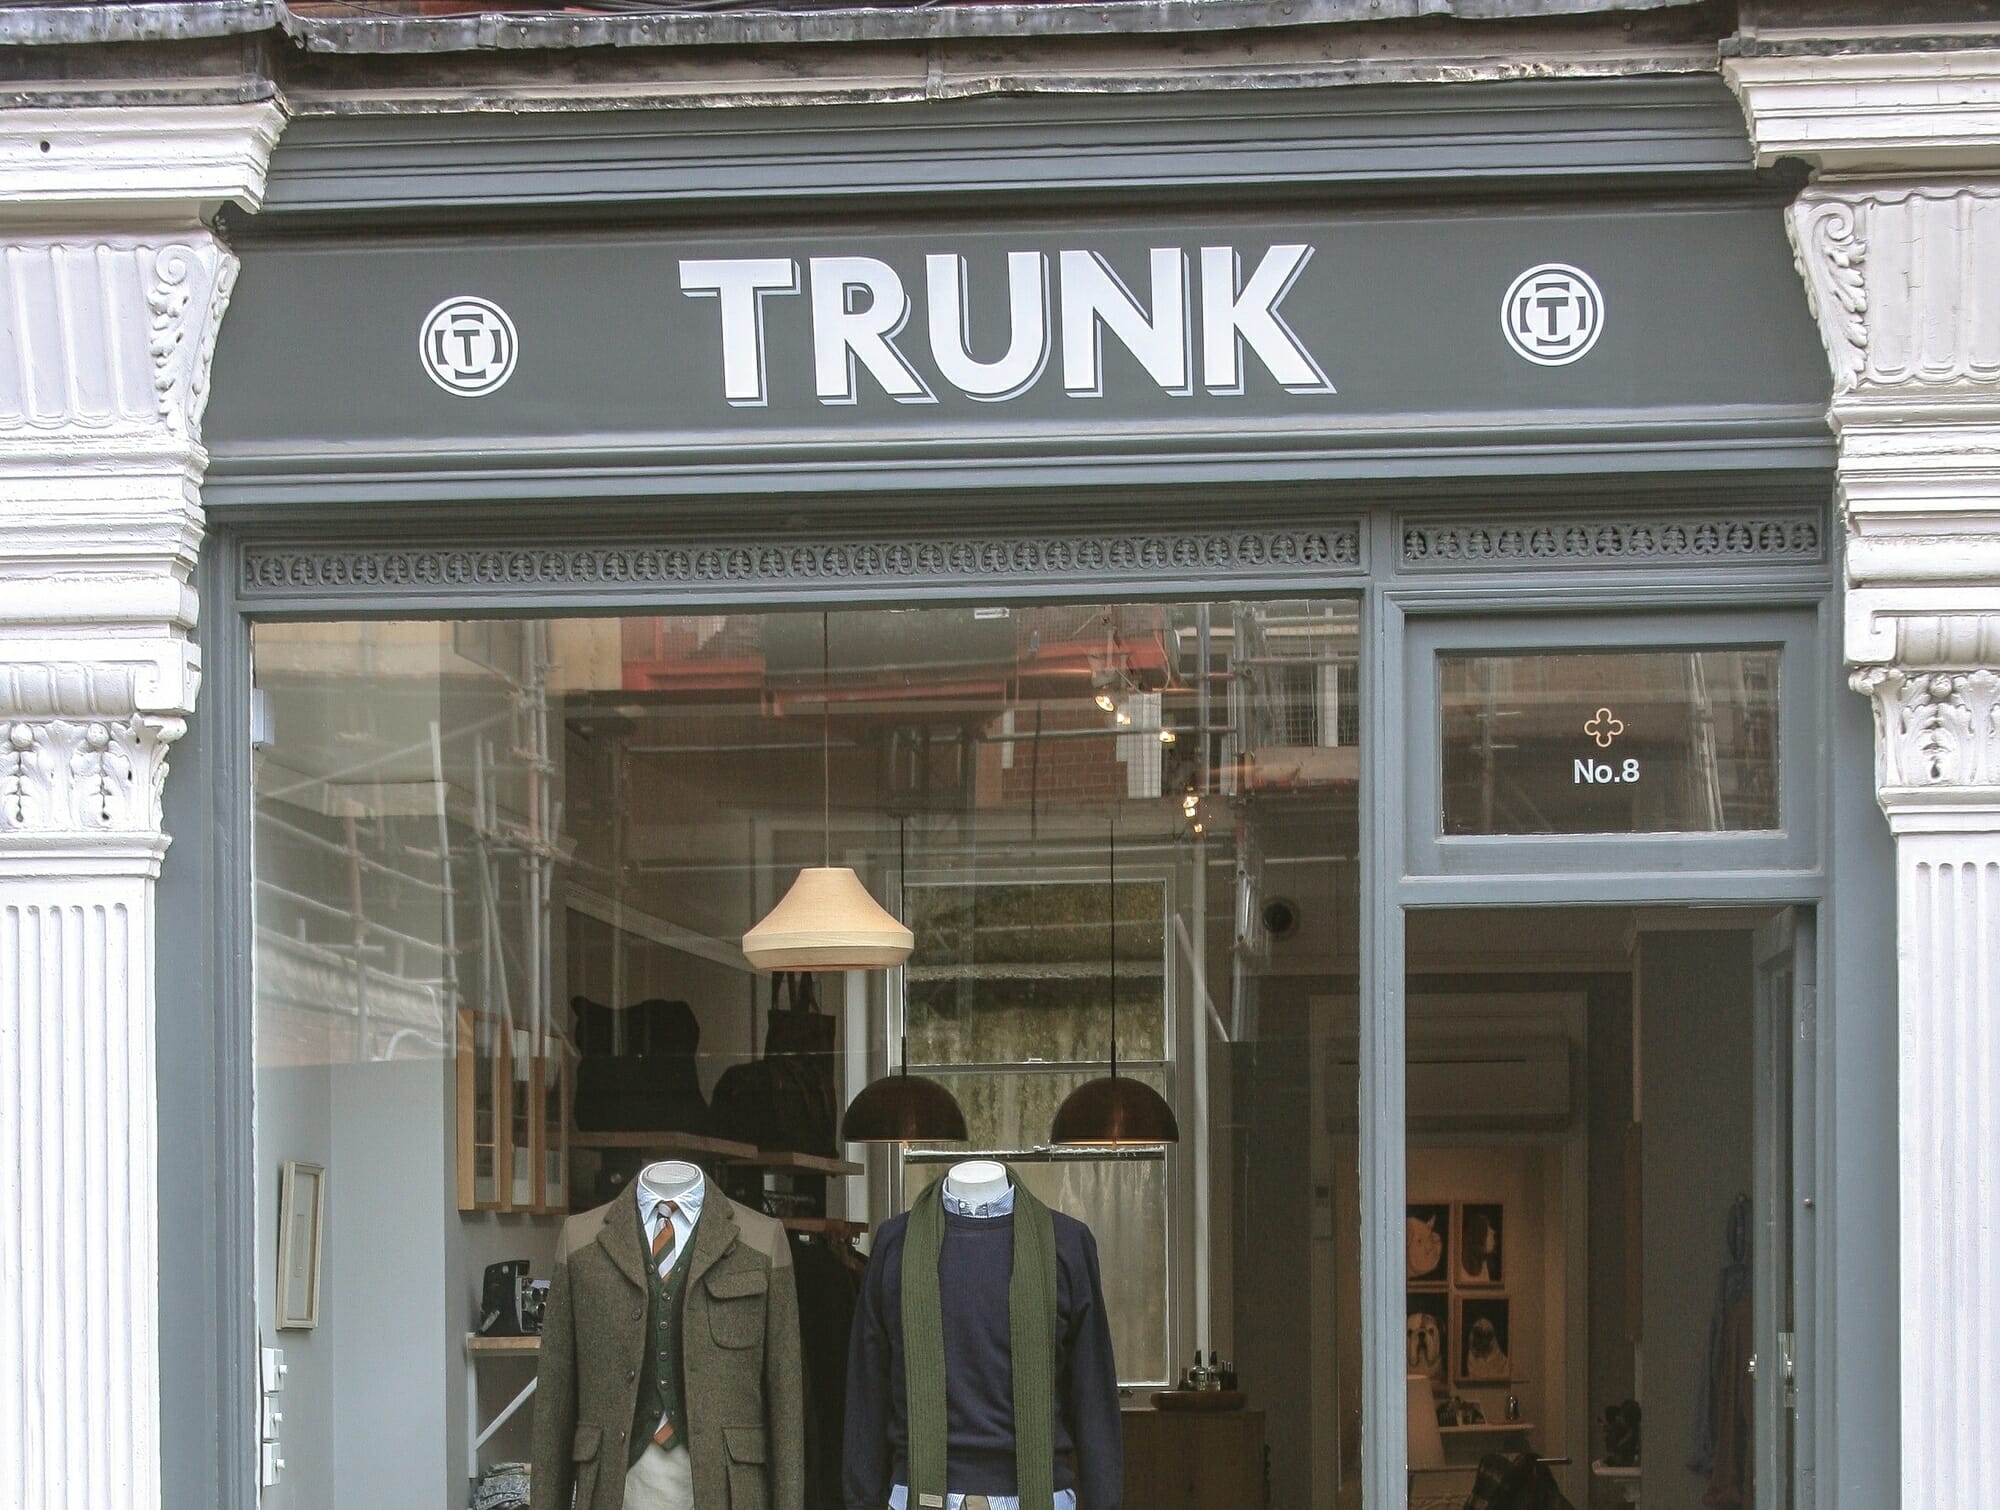 The storefront of Trunk Clothiers in Marylebone, London.